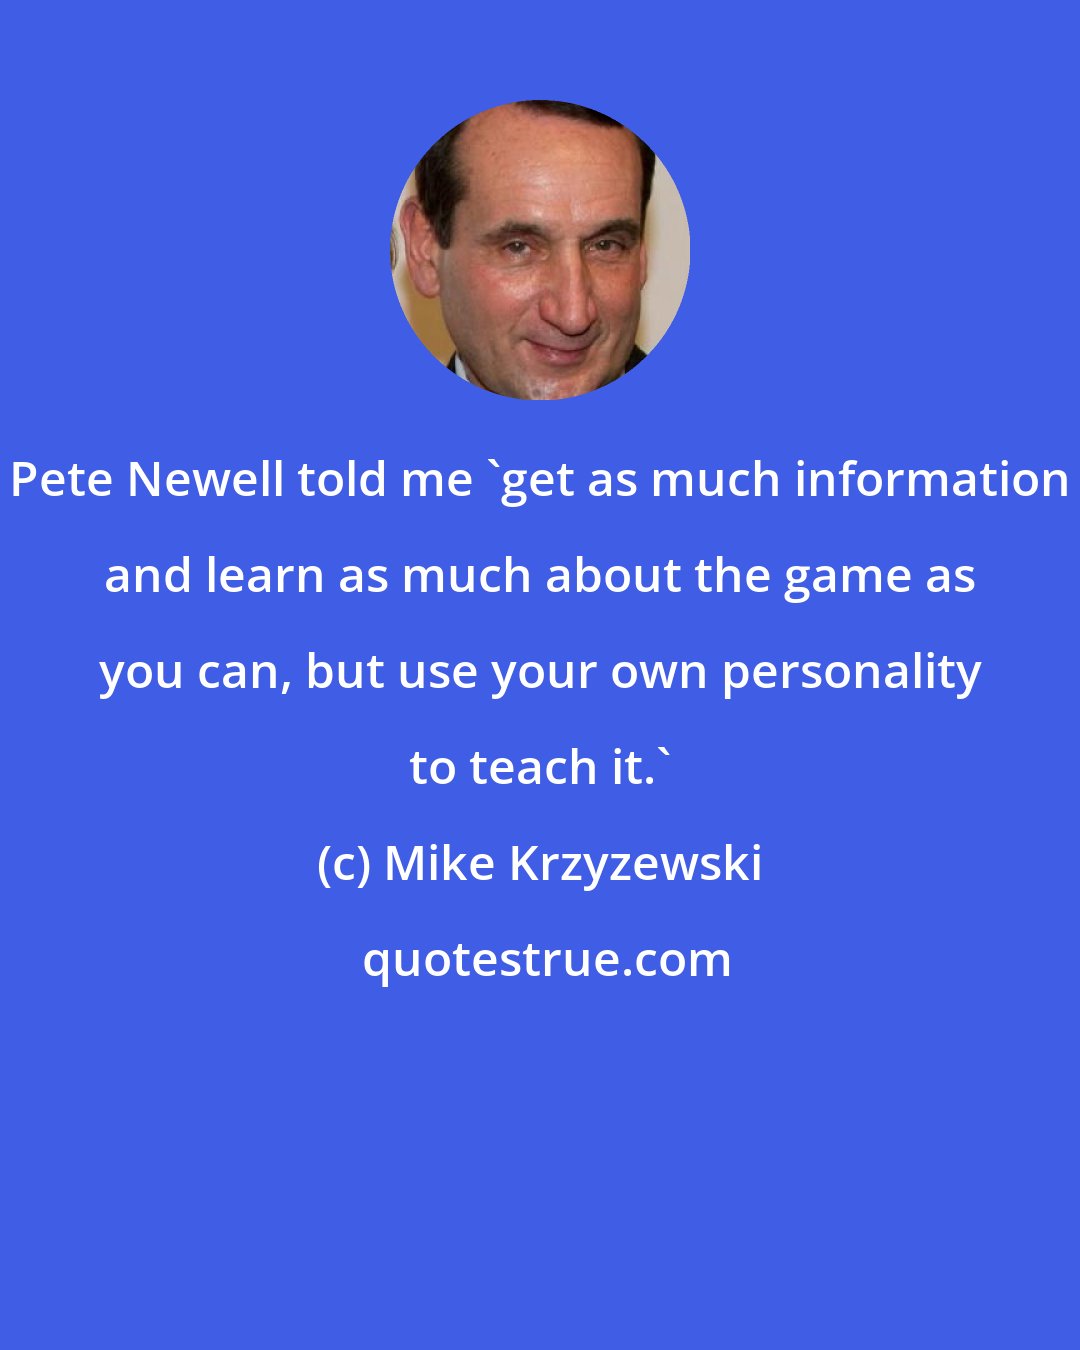 Mike Krzyzewski: Pete Newell told me 'get as much information and learn as much about the game as you can, but use your own personality to teach it.'